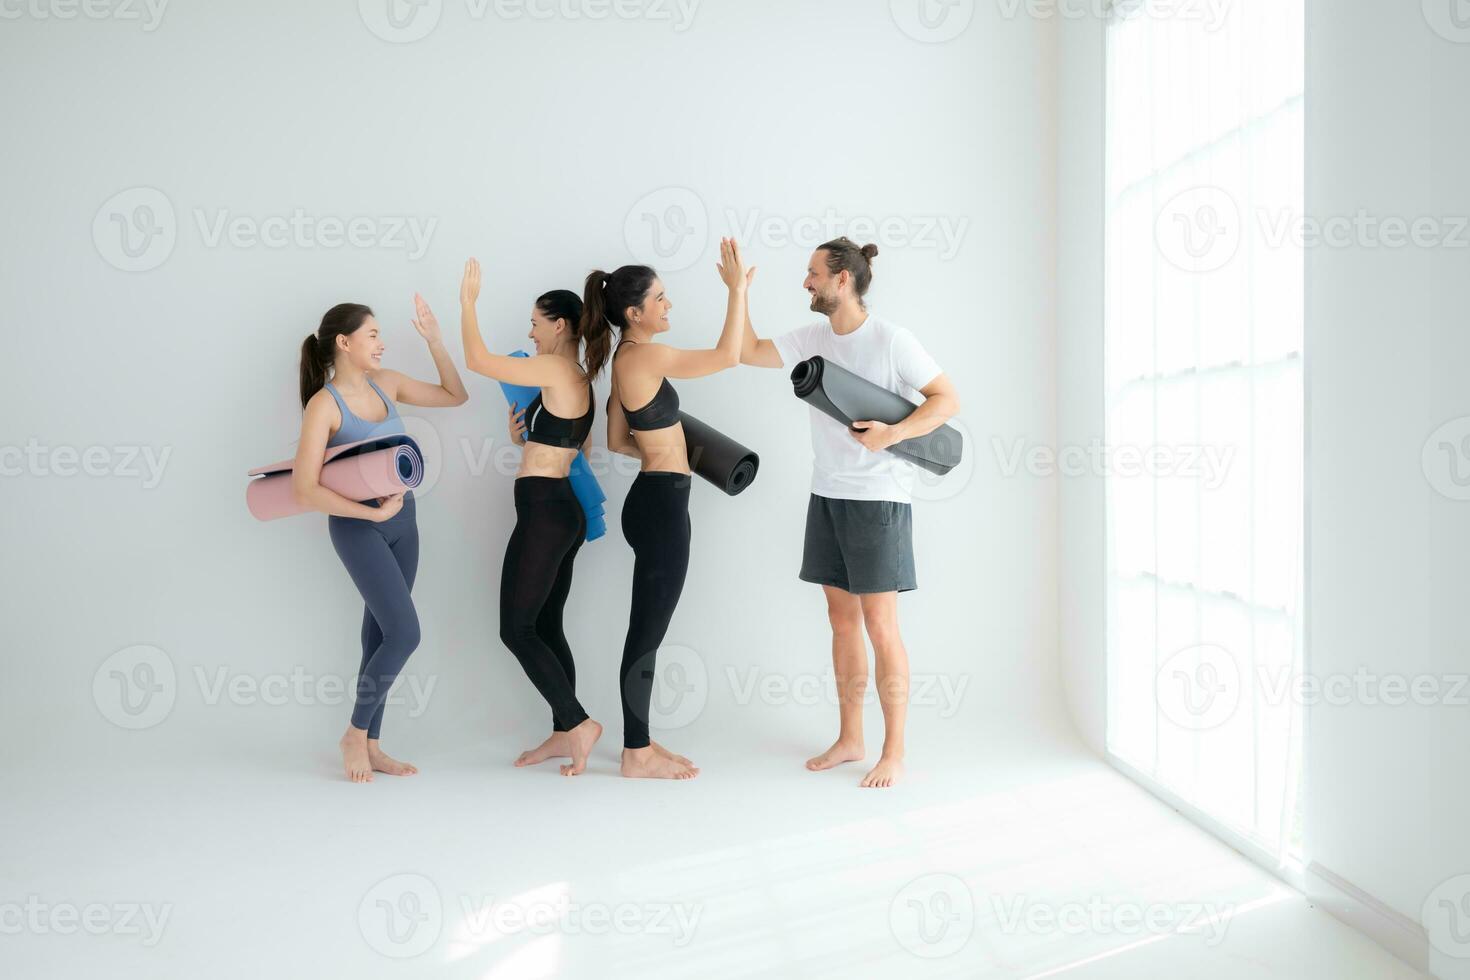 A group of female and male athletes stood and chatted amicably in the studio before beginning with the yoga class. photo